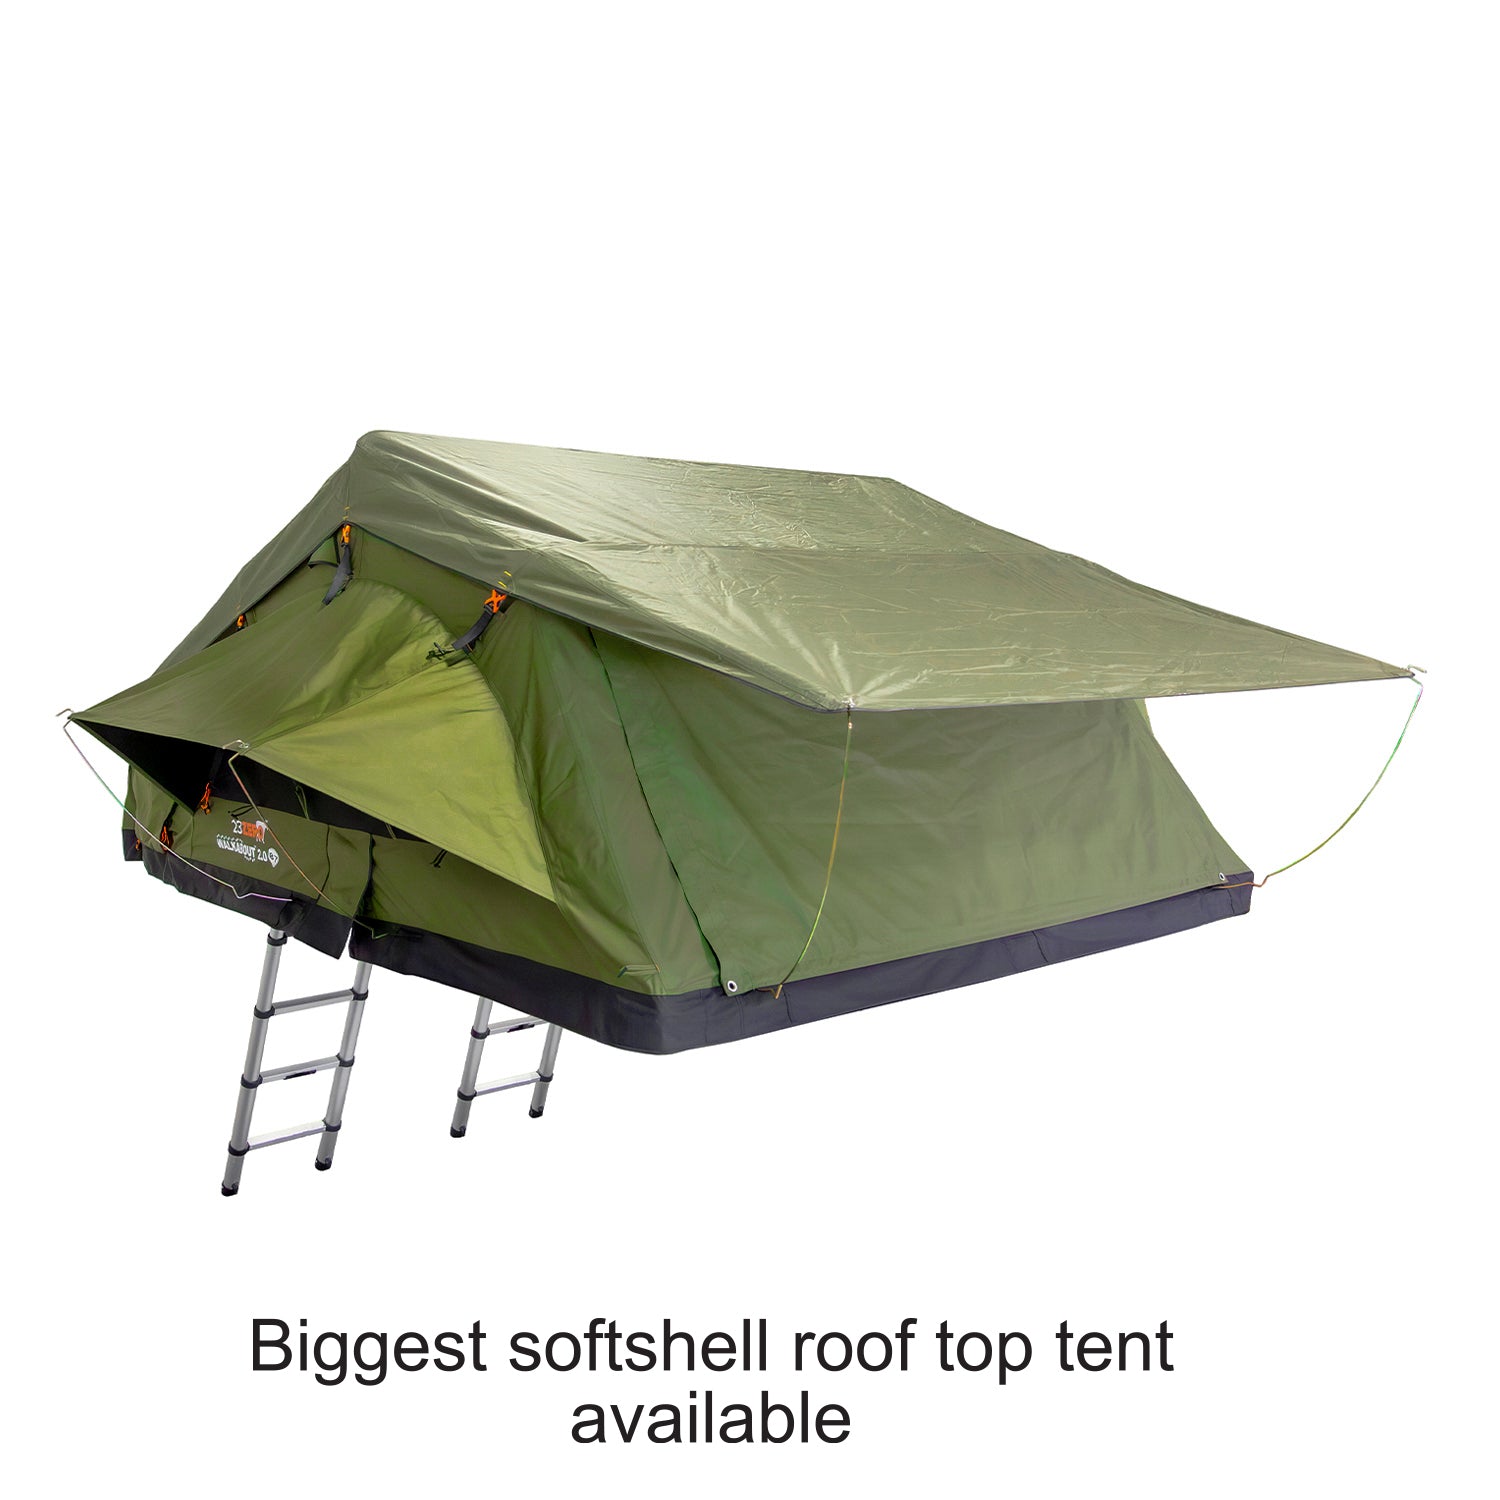 Walkabout Biggest Softshell roof top tent view